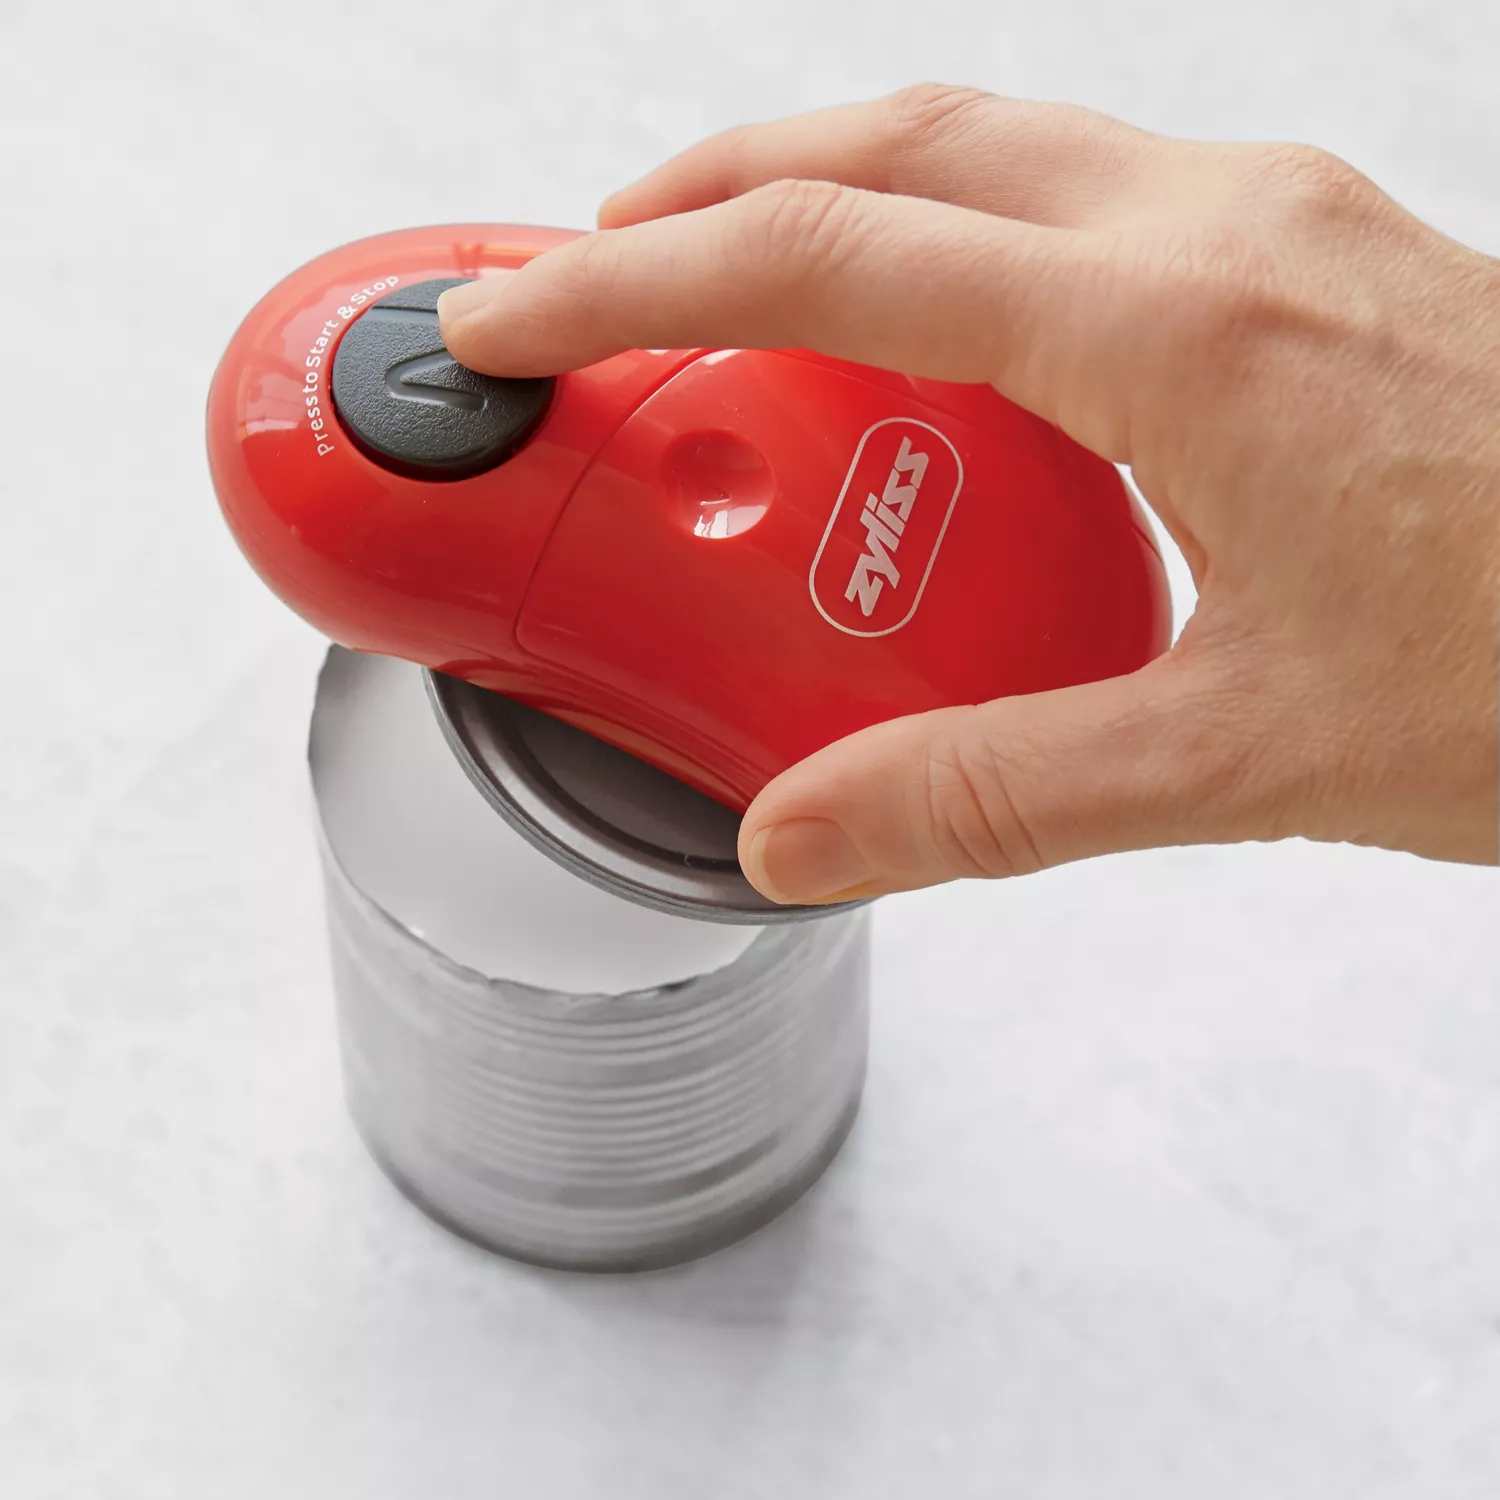 Zyliss Easican Electric Can Opener